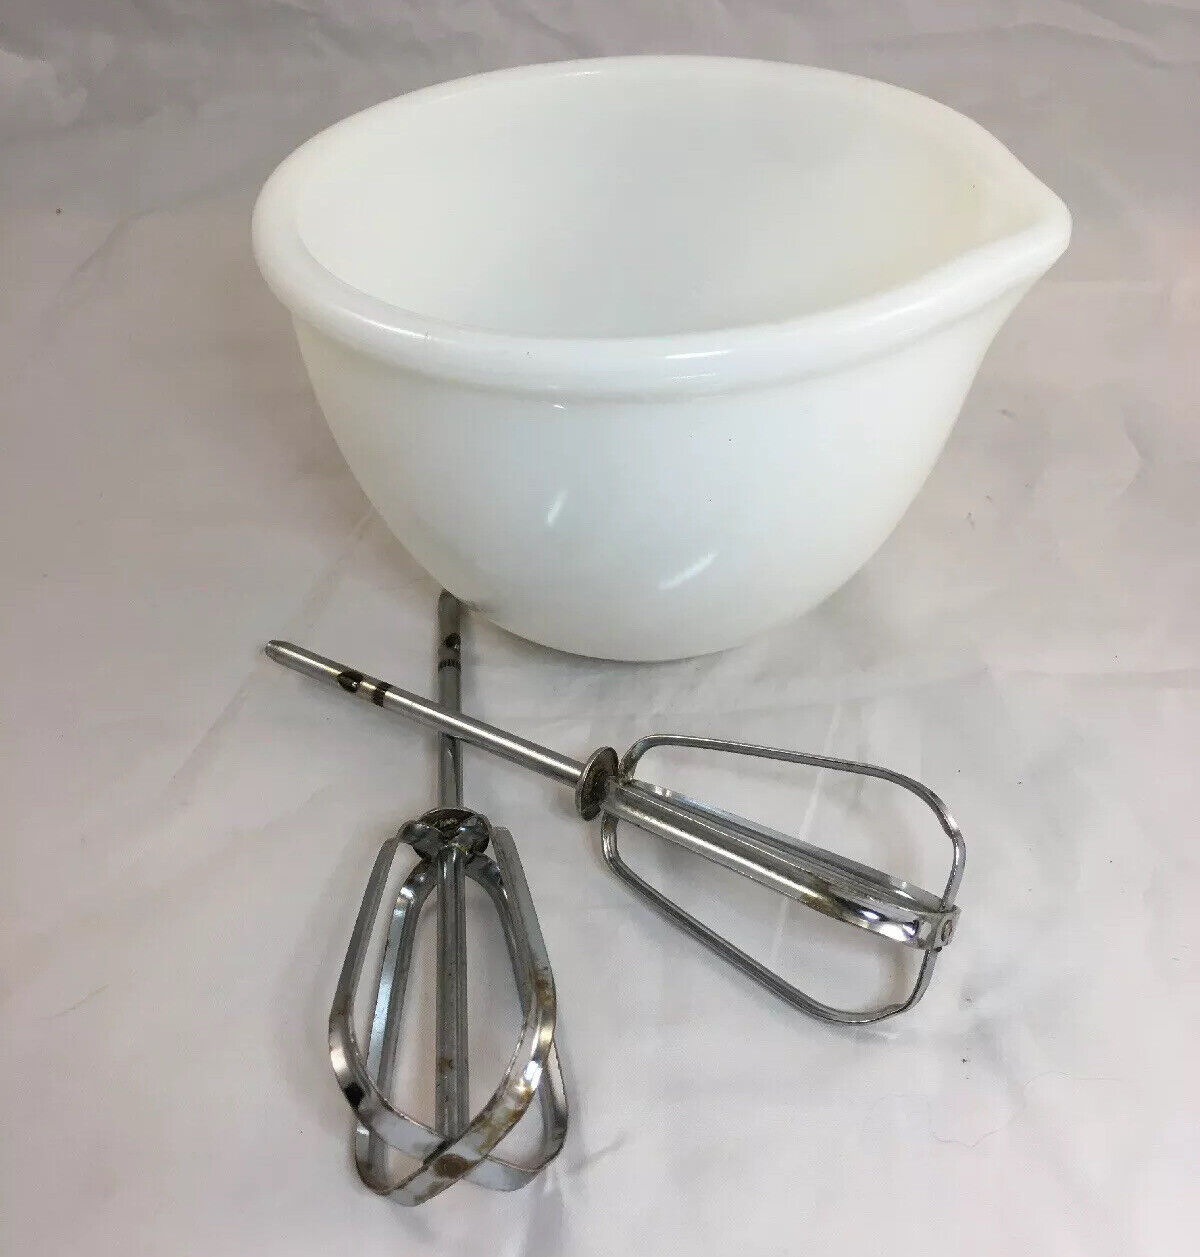 Vintage Mixing Bowl White Milk Glass 6.5” X 4.5” With 2 Beaters 